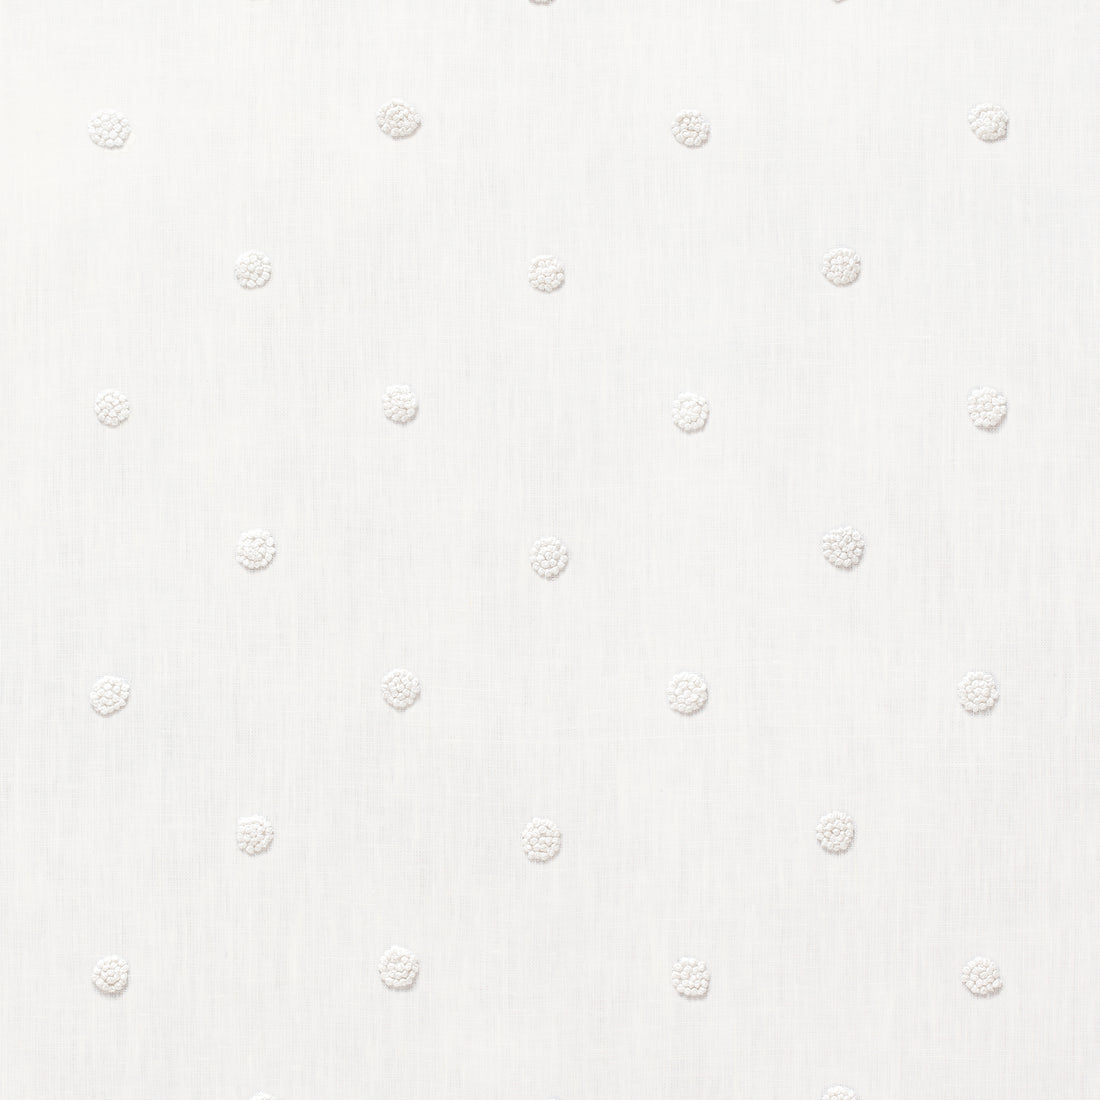 French Knot Embroidery fabric in white color - pattern number AW73010 - by Anna French in the Meridian collection